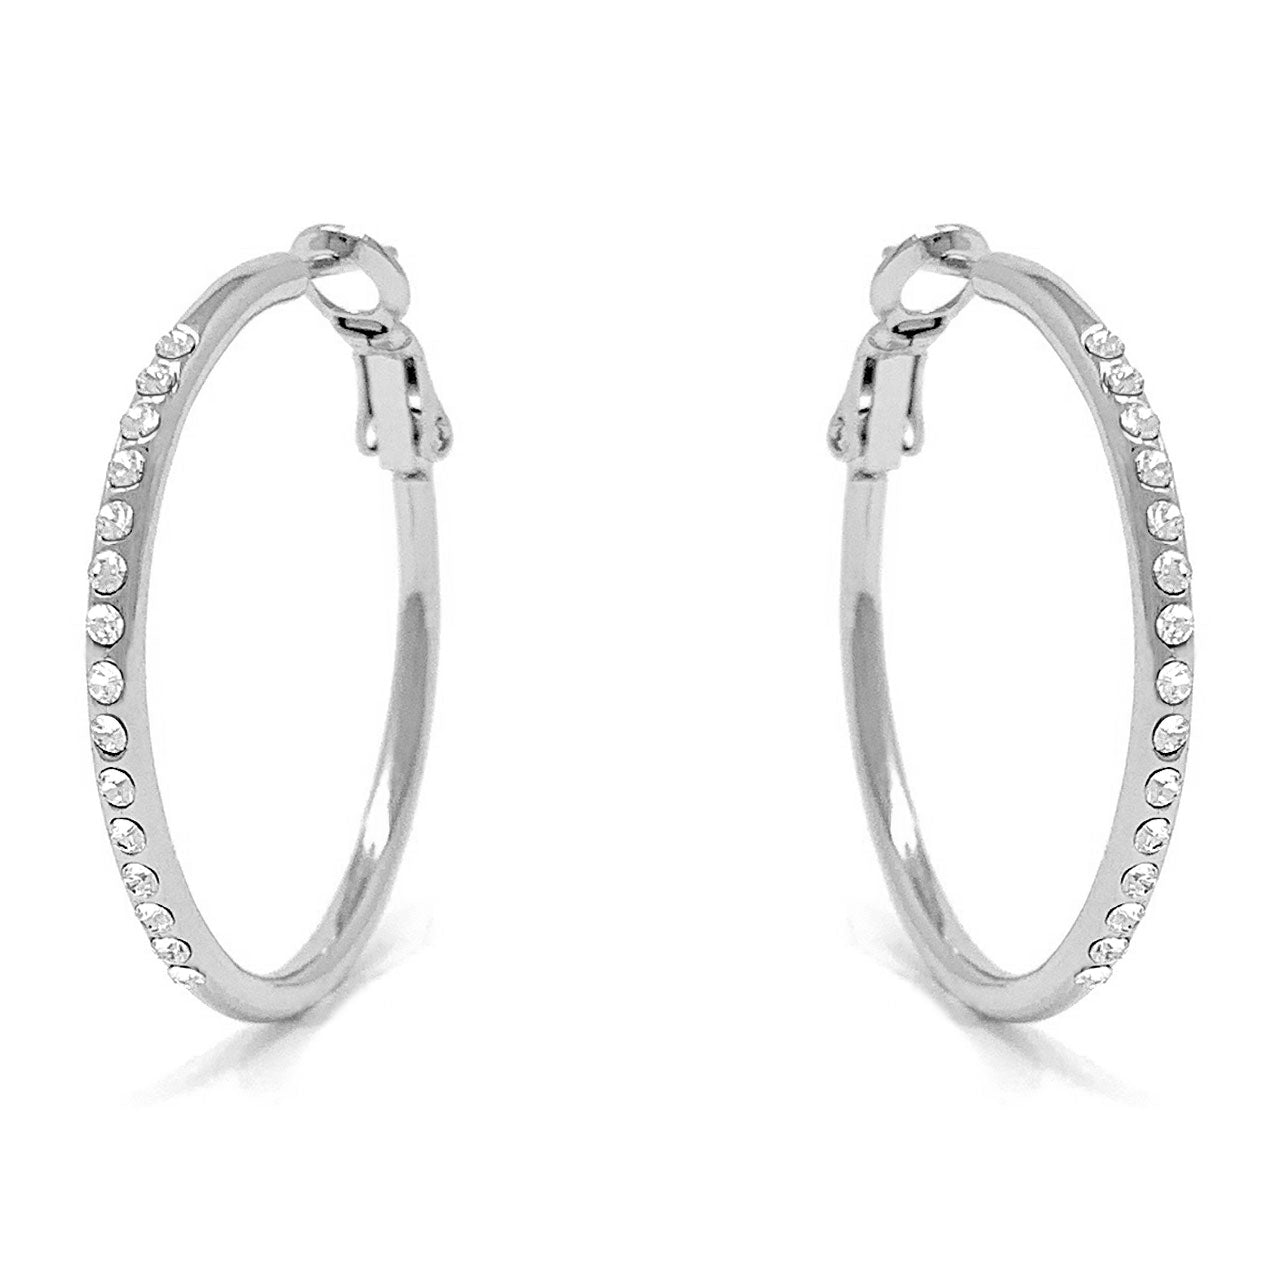 Amelia Small Pave Hoop Earrings with White Clear Round Crystals from Swarovski Silver Toned Rhodium Plated - Ed Heart